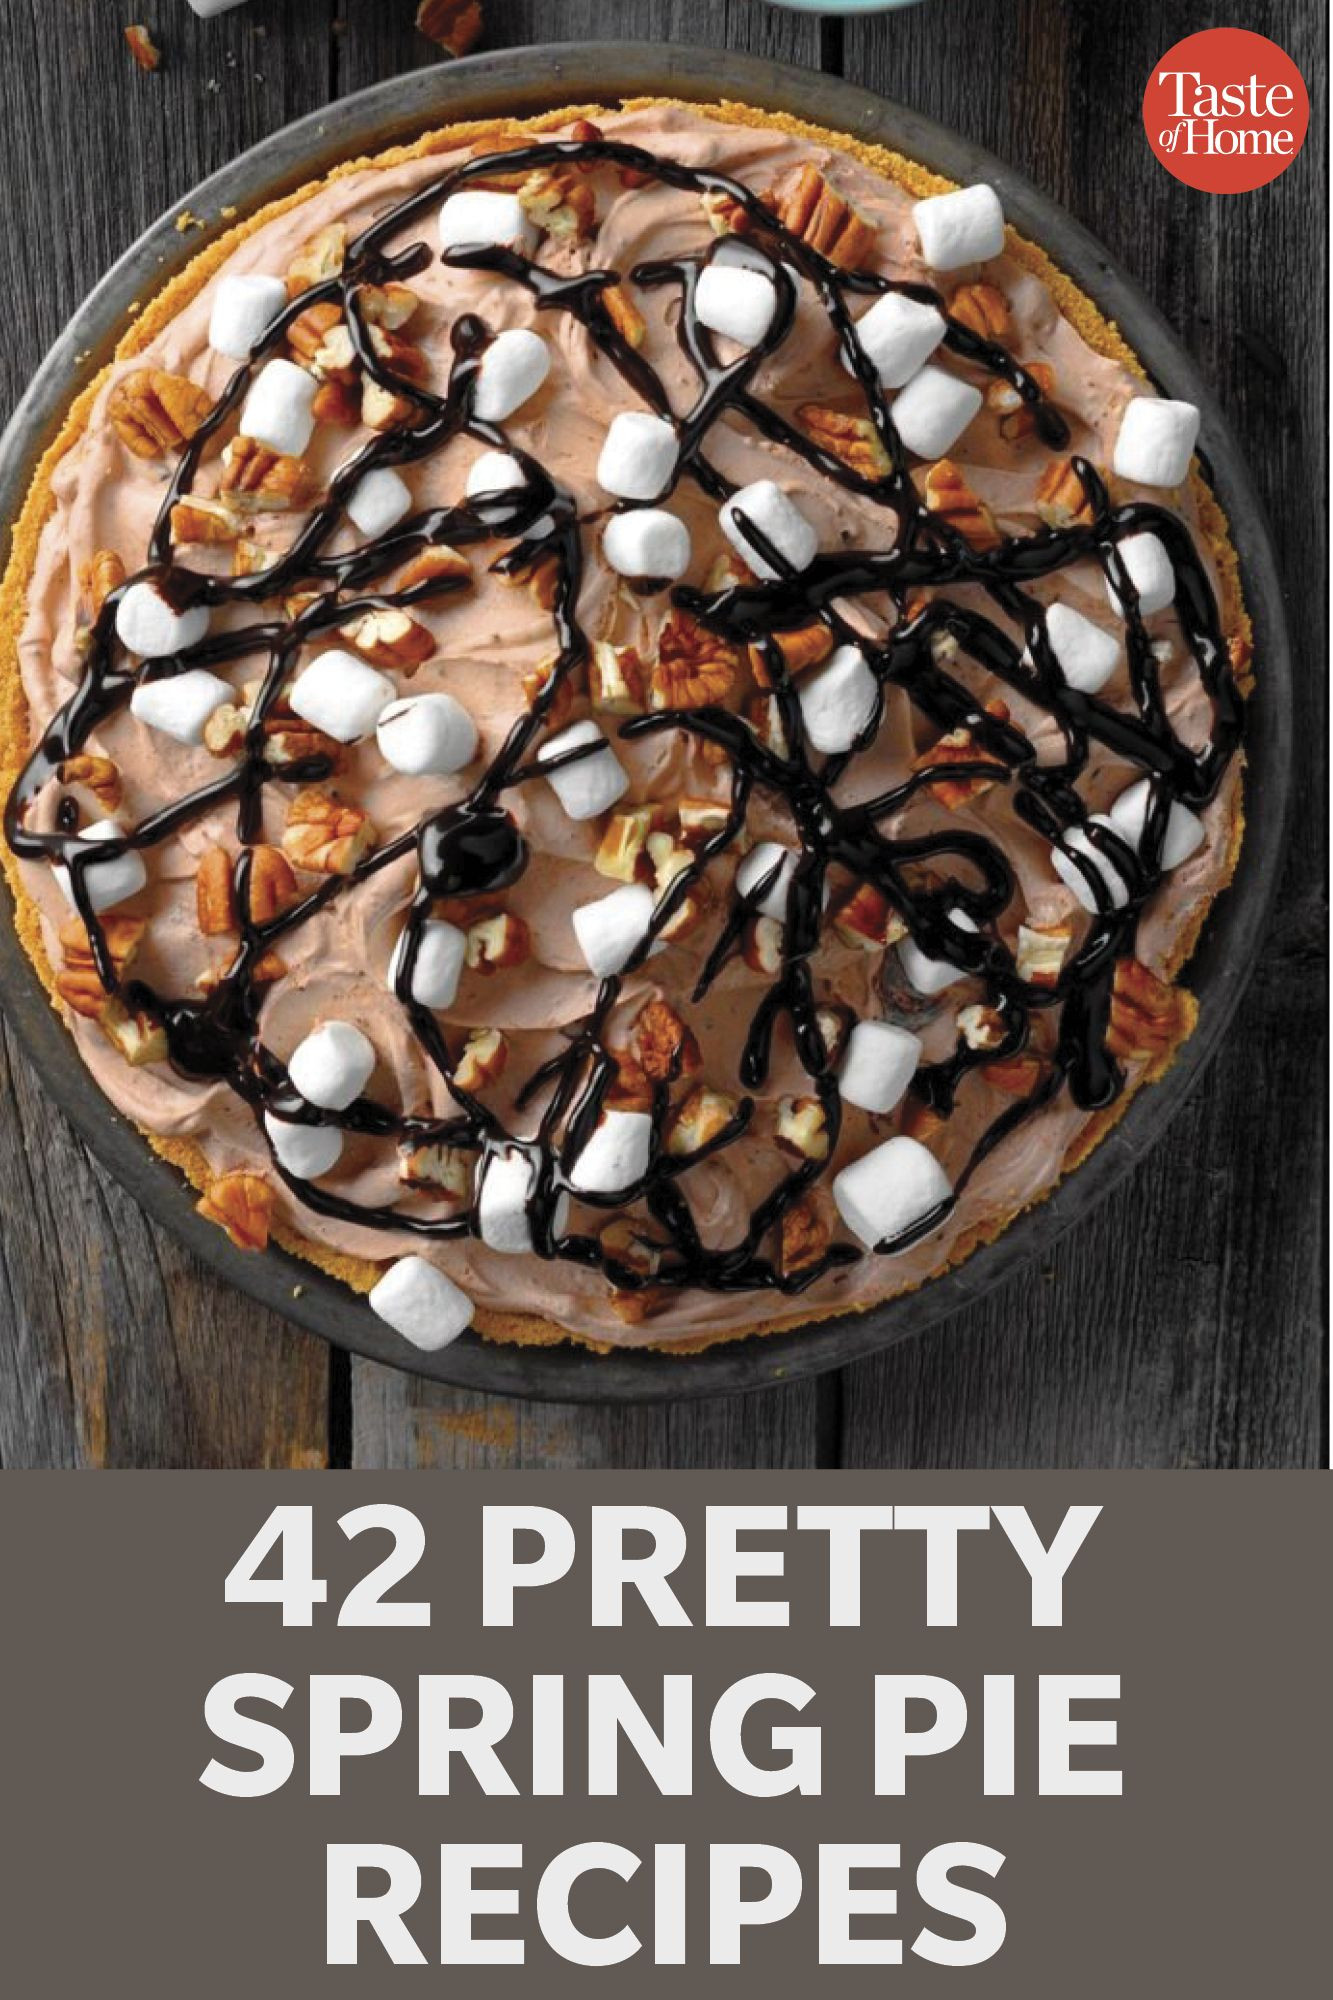 Spring Pie Recipes
 42 Gorgeous Pies to Make for Spring in 2020